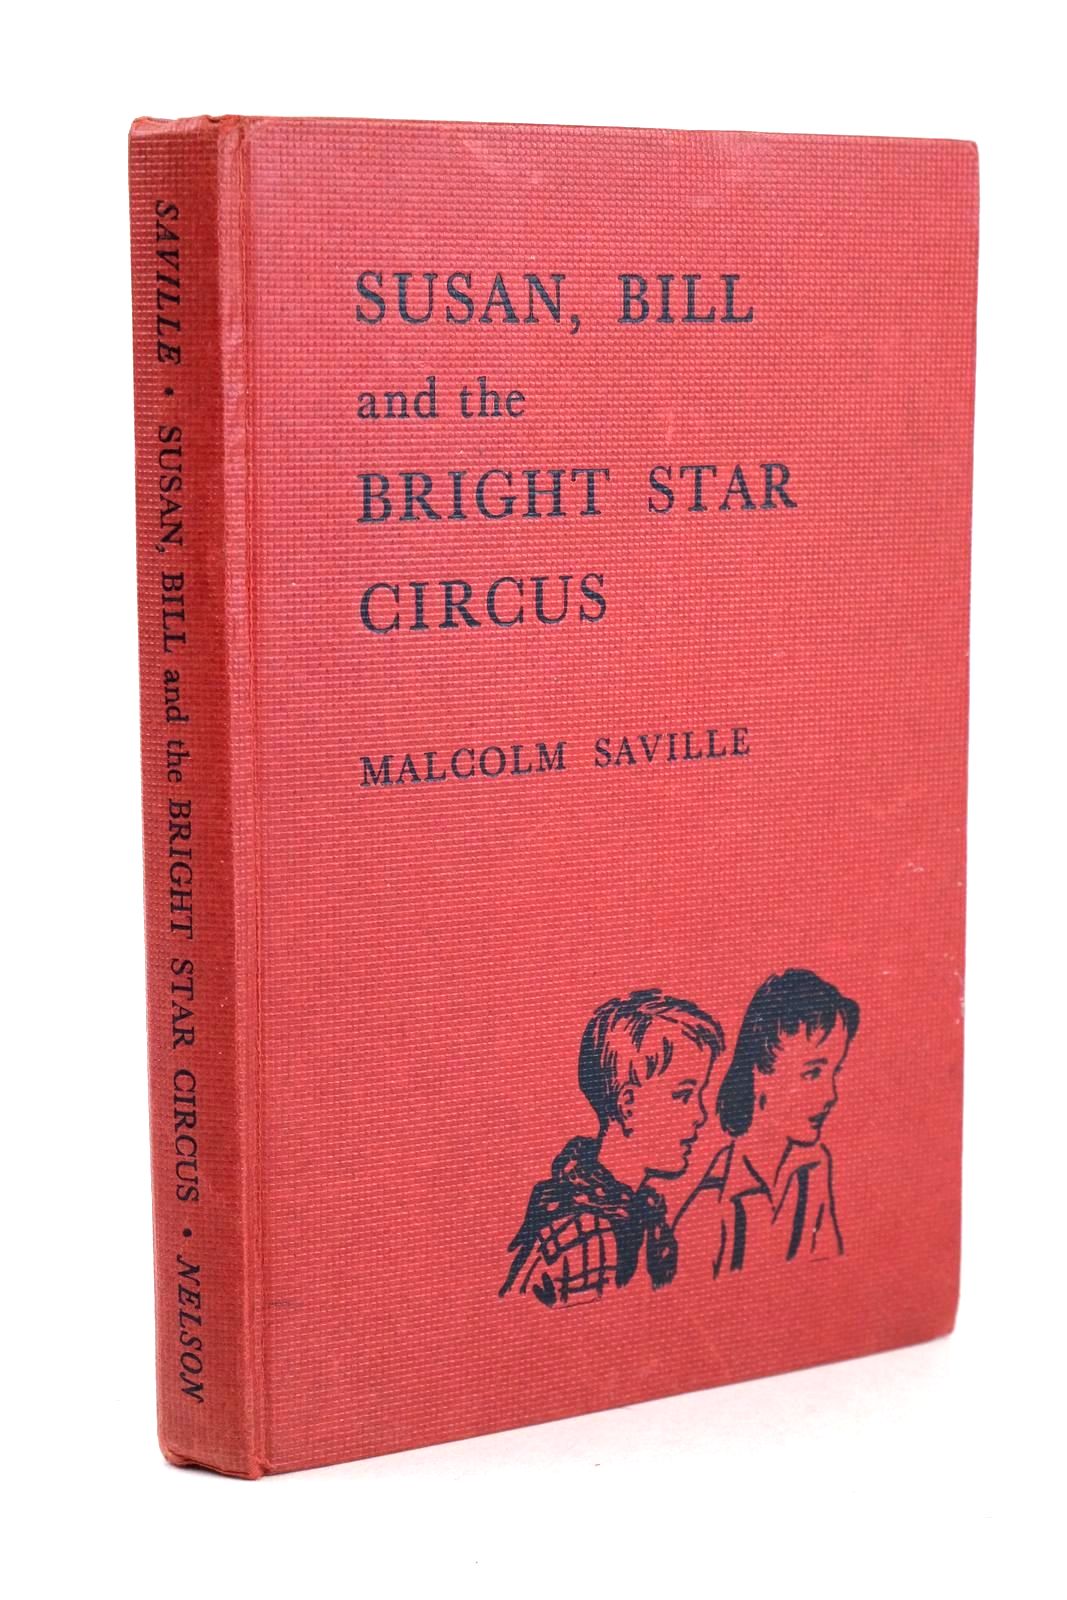 Photo of SUSAN, BILL AND THE BRIGHT STAR CIRCUS written by Saville, Malcolm illustrated by Freeman, T.R. published by Thomas Nelson and Sons Ltd. (STOCK CODE: 1326149)  for sale by Stella & Rose's Books